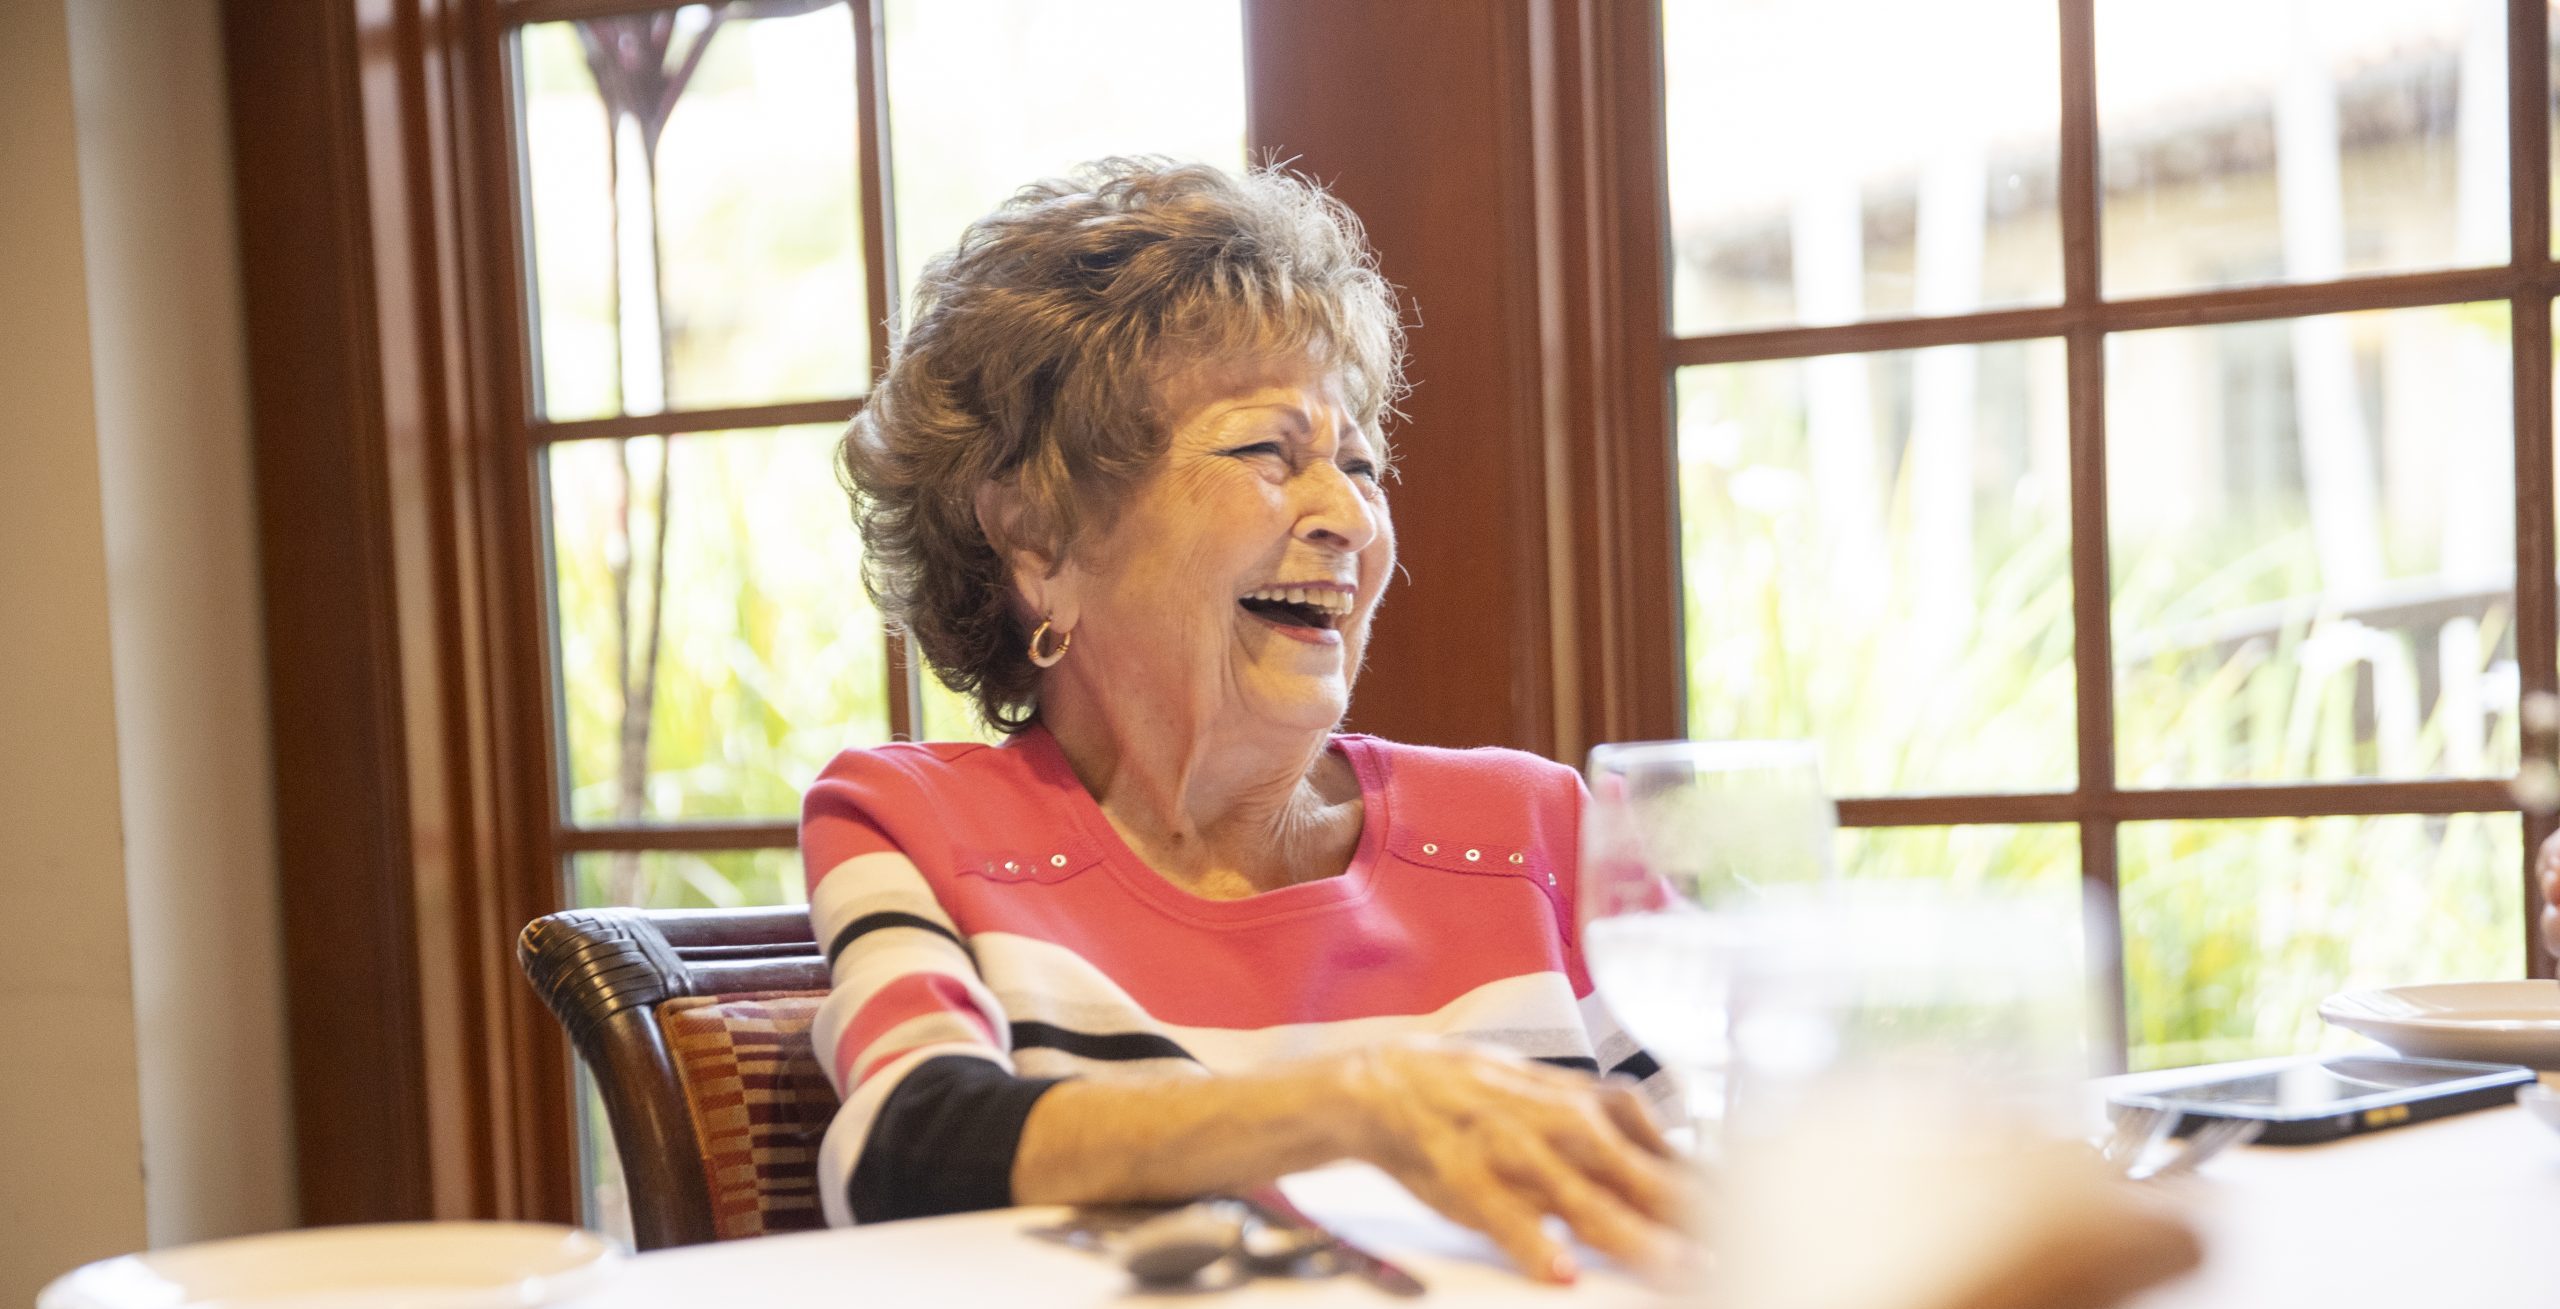 elderly woman laughing while dining with friends